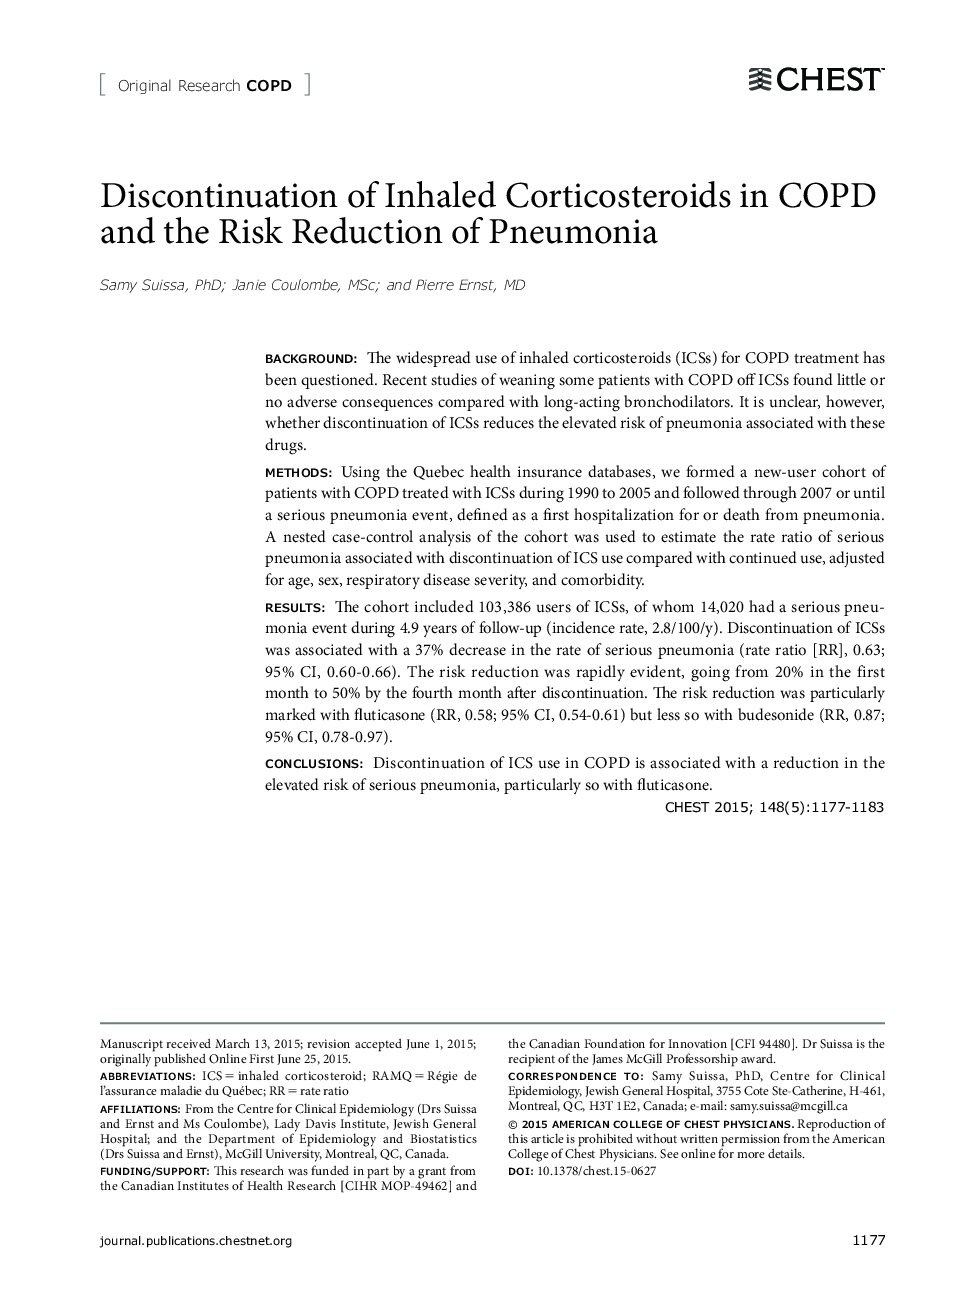 Original Research COPDDiscontinuation of Inhaled Corticosteroids in COPD and the Risk Reduction of Pneumonia